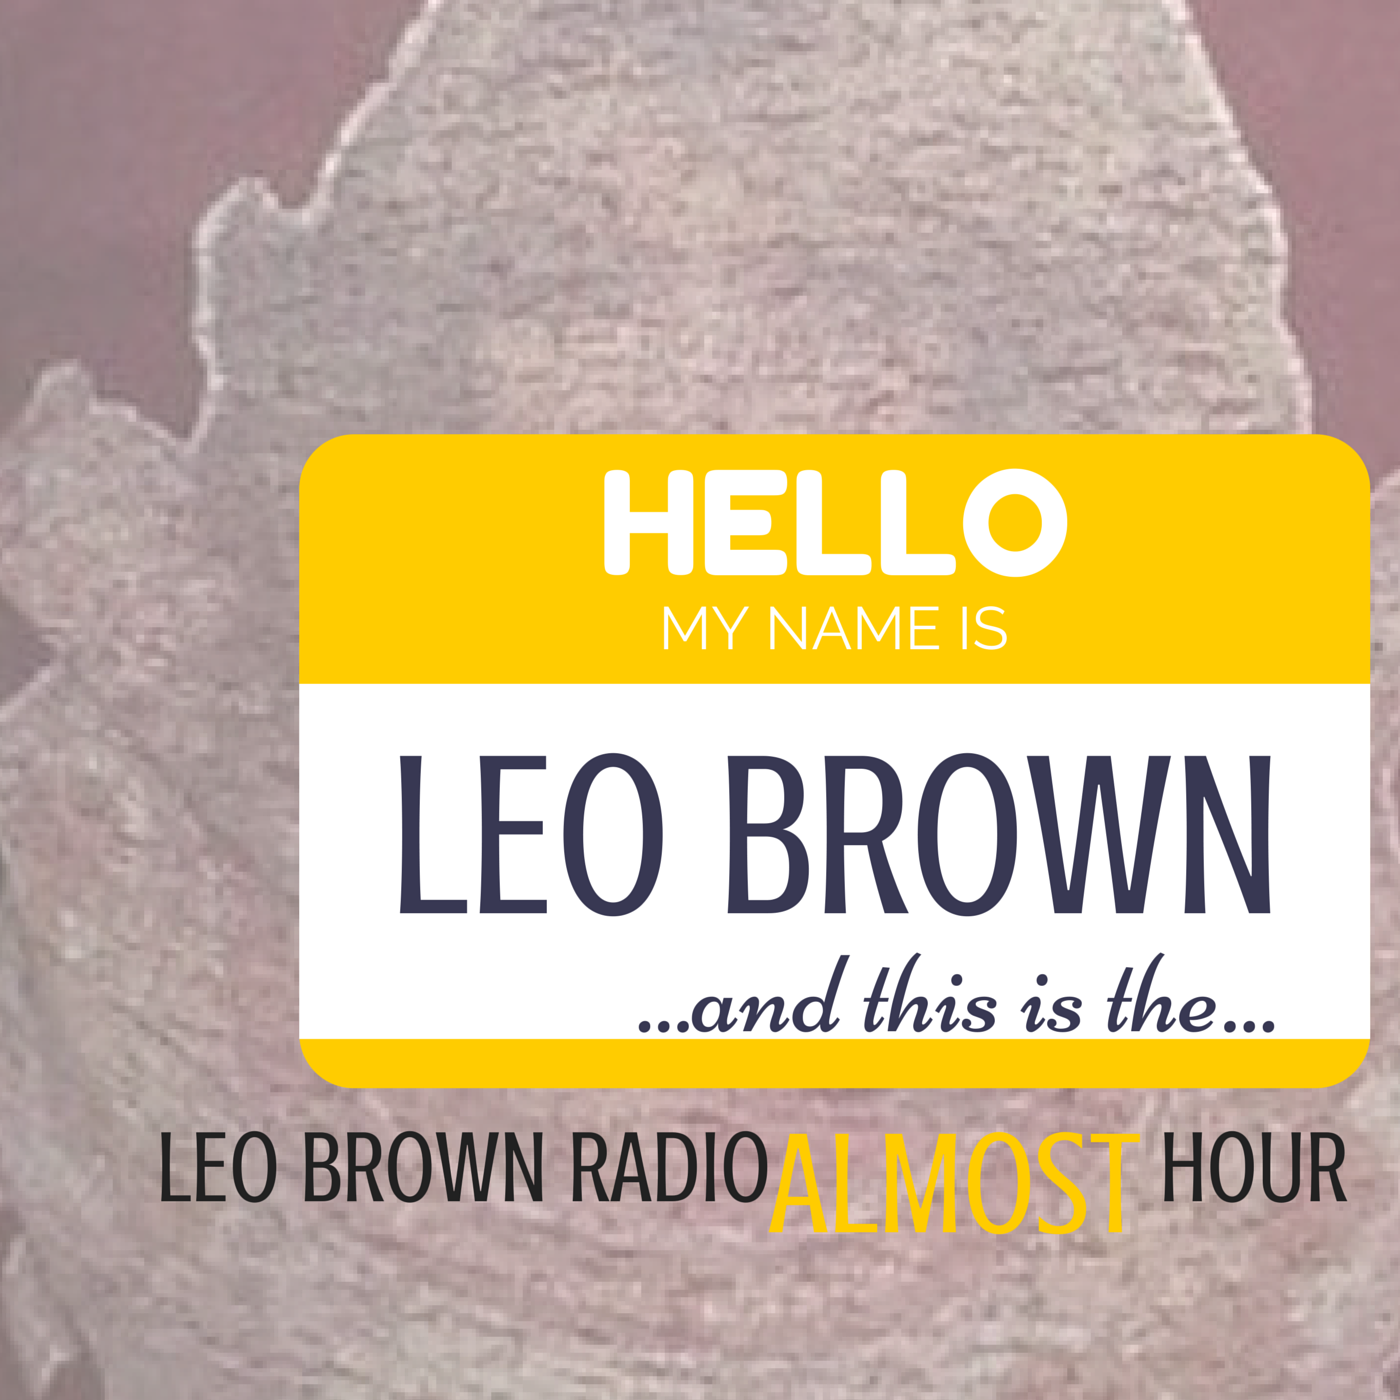 Leo Brown Almost Hour 4/20/17